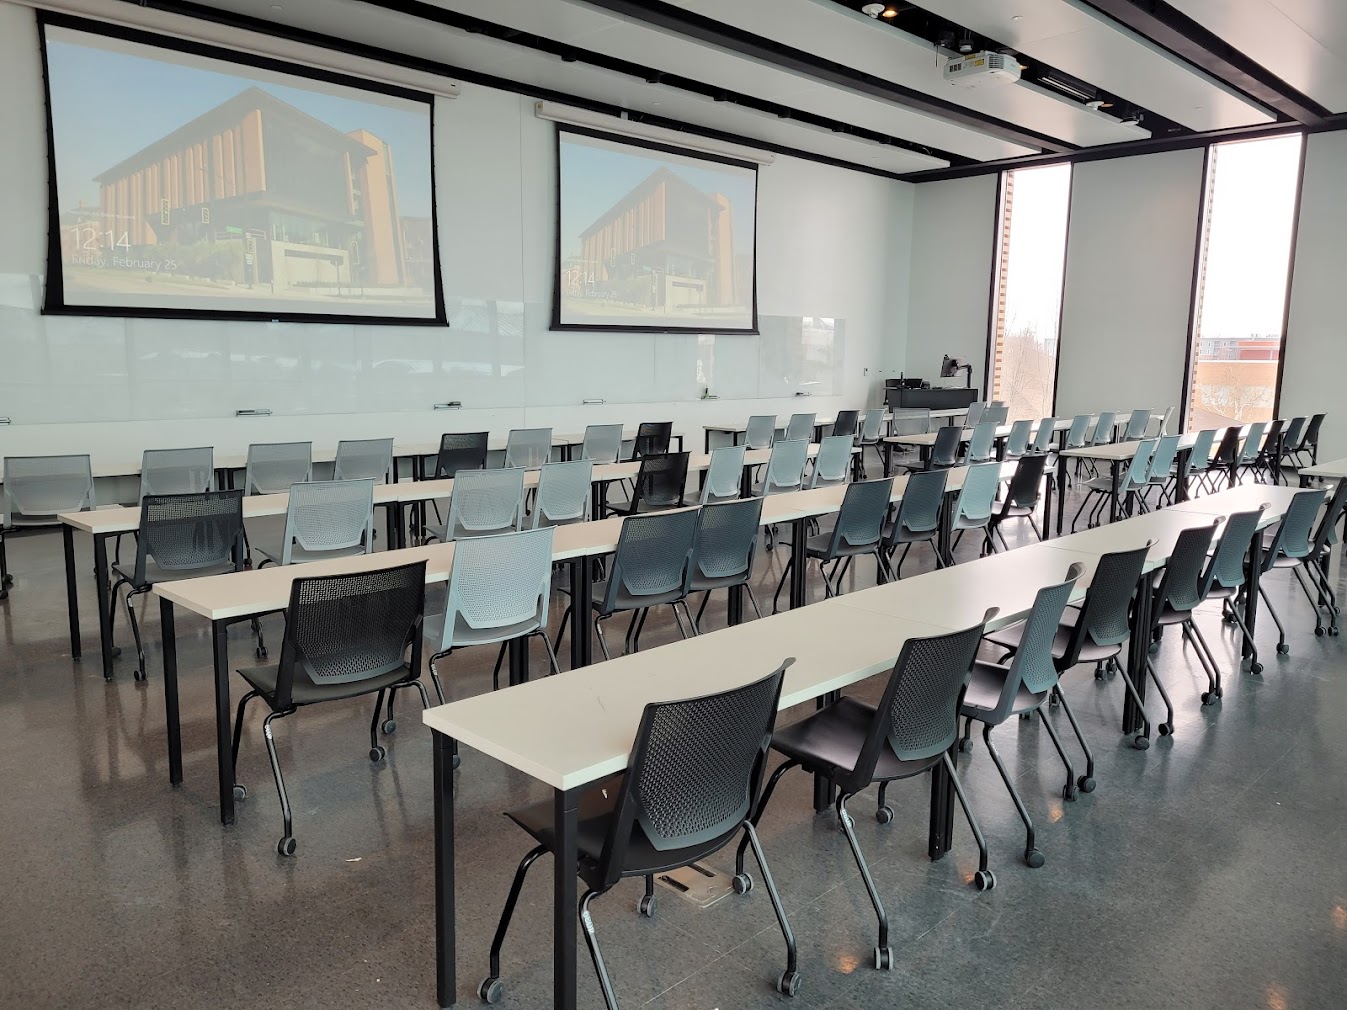 This is a view of the room with student desks, projection screens, a front lecture table, and whiteboards.